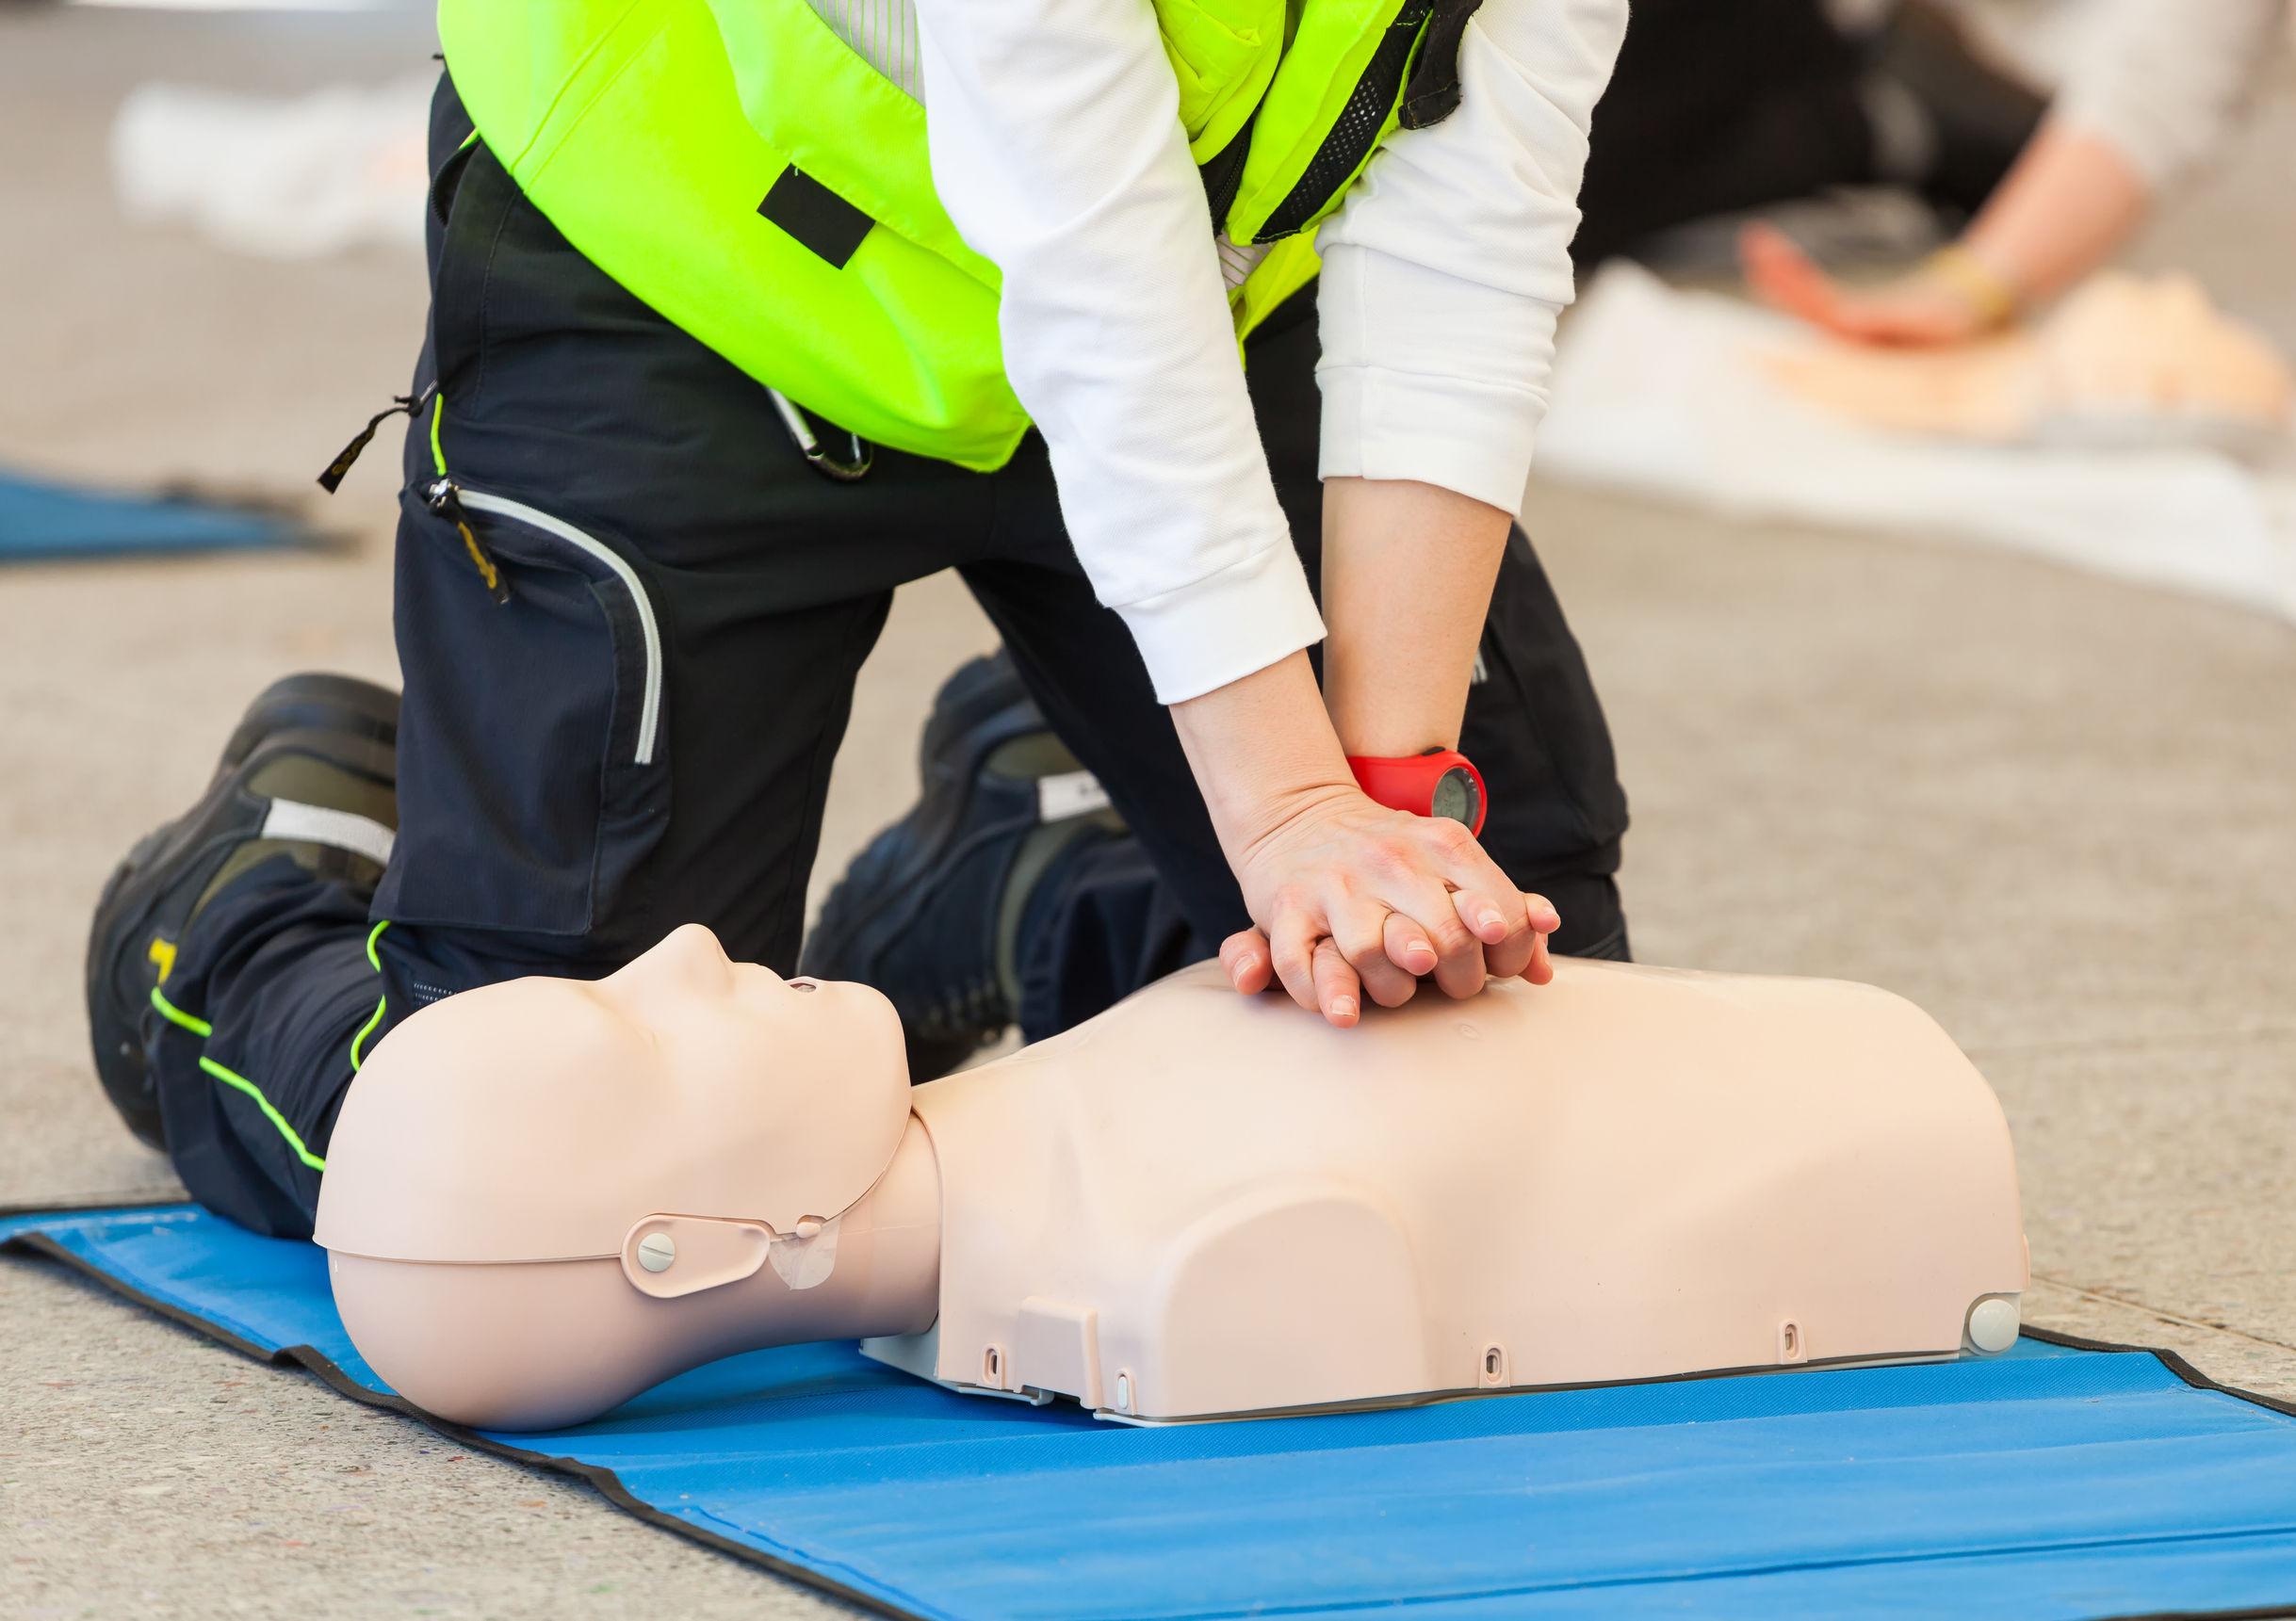 basic-first-aid-st-bernard-s-health-and-safety-institute